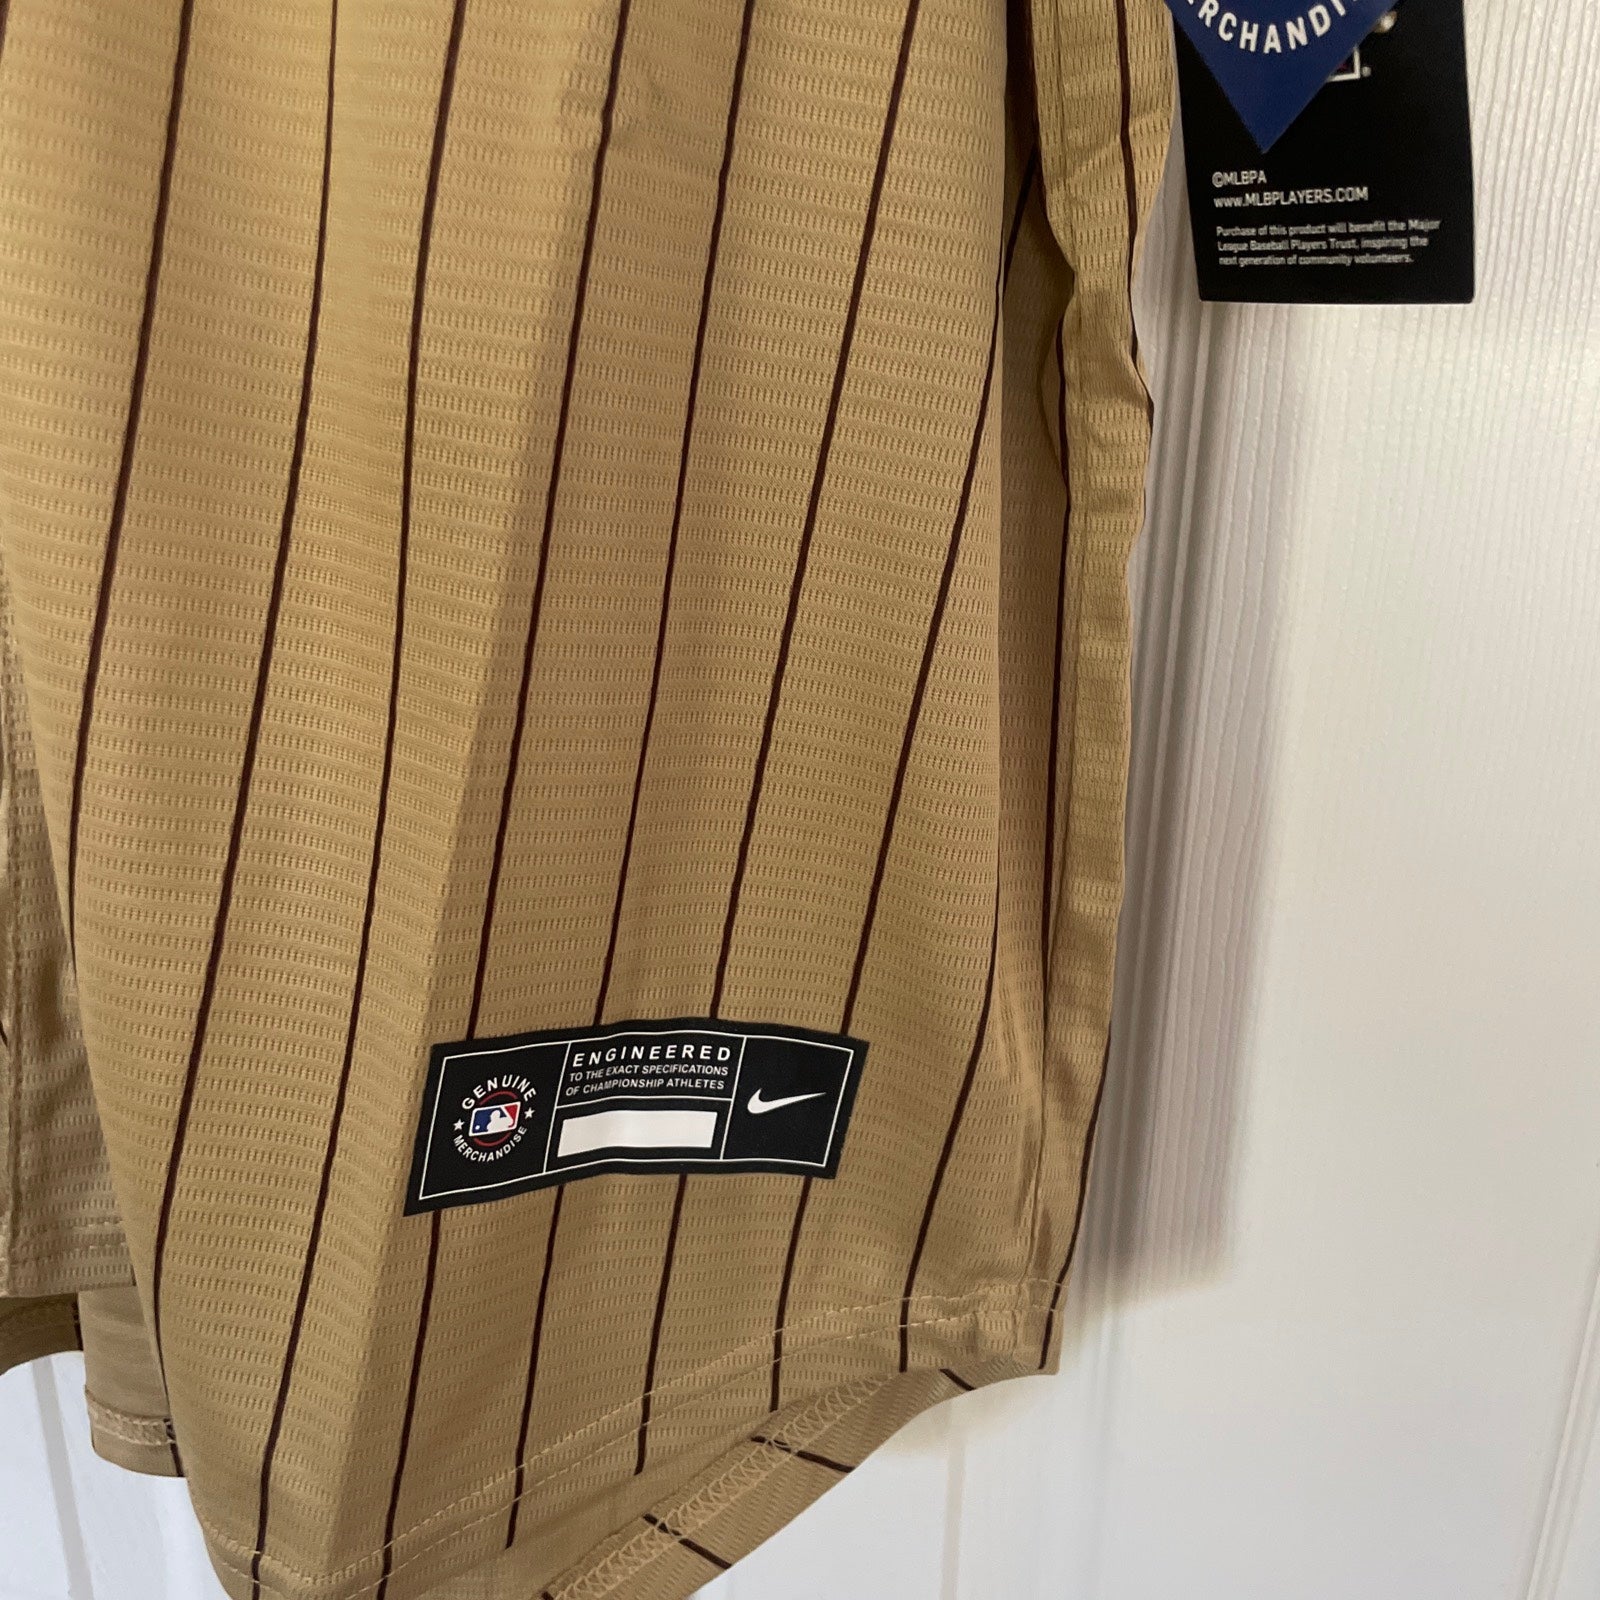 Brand New San Diego Padres Juan Soto Jersey With Tags - Men's Size XL